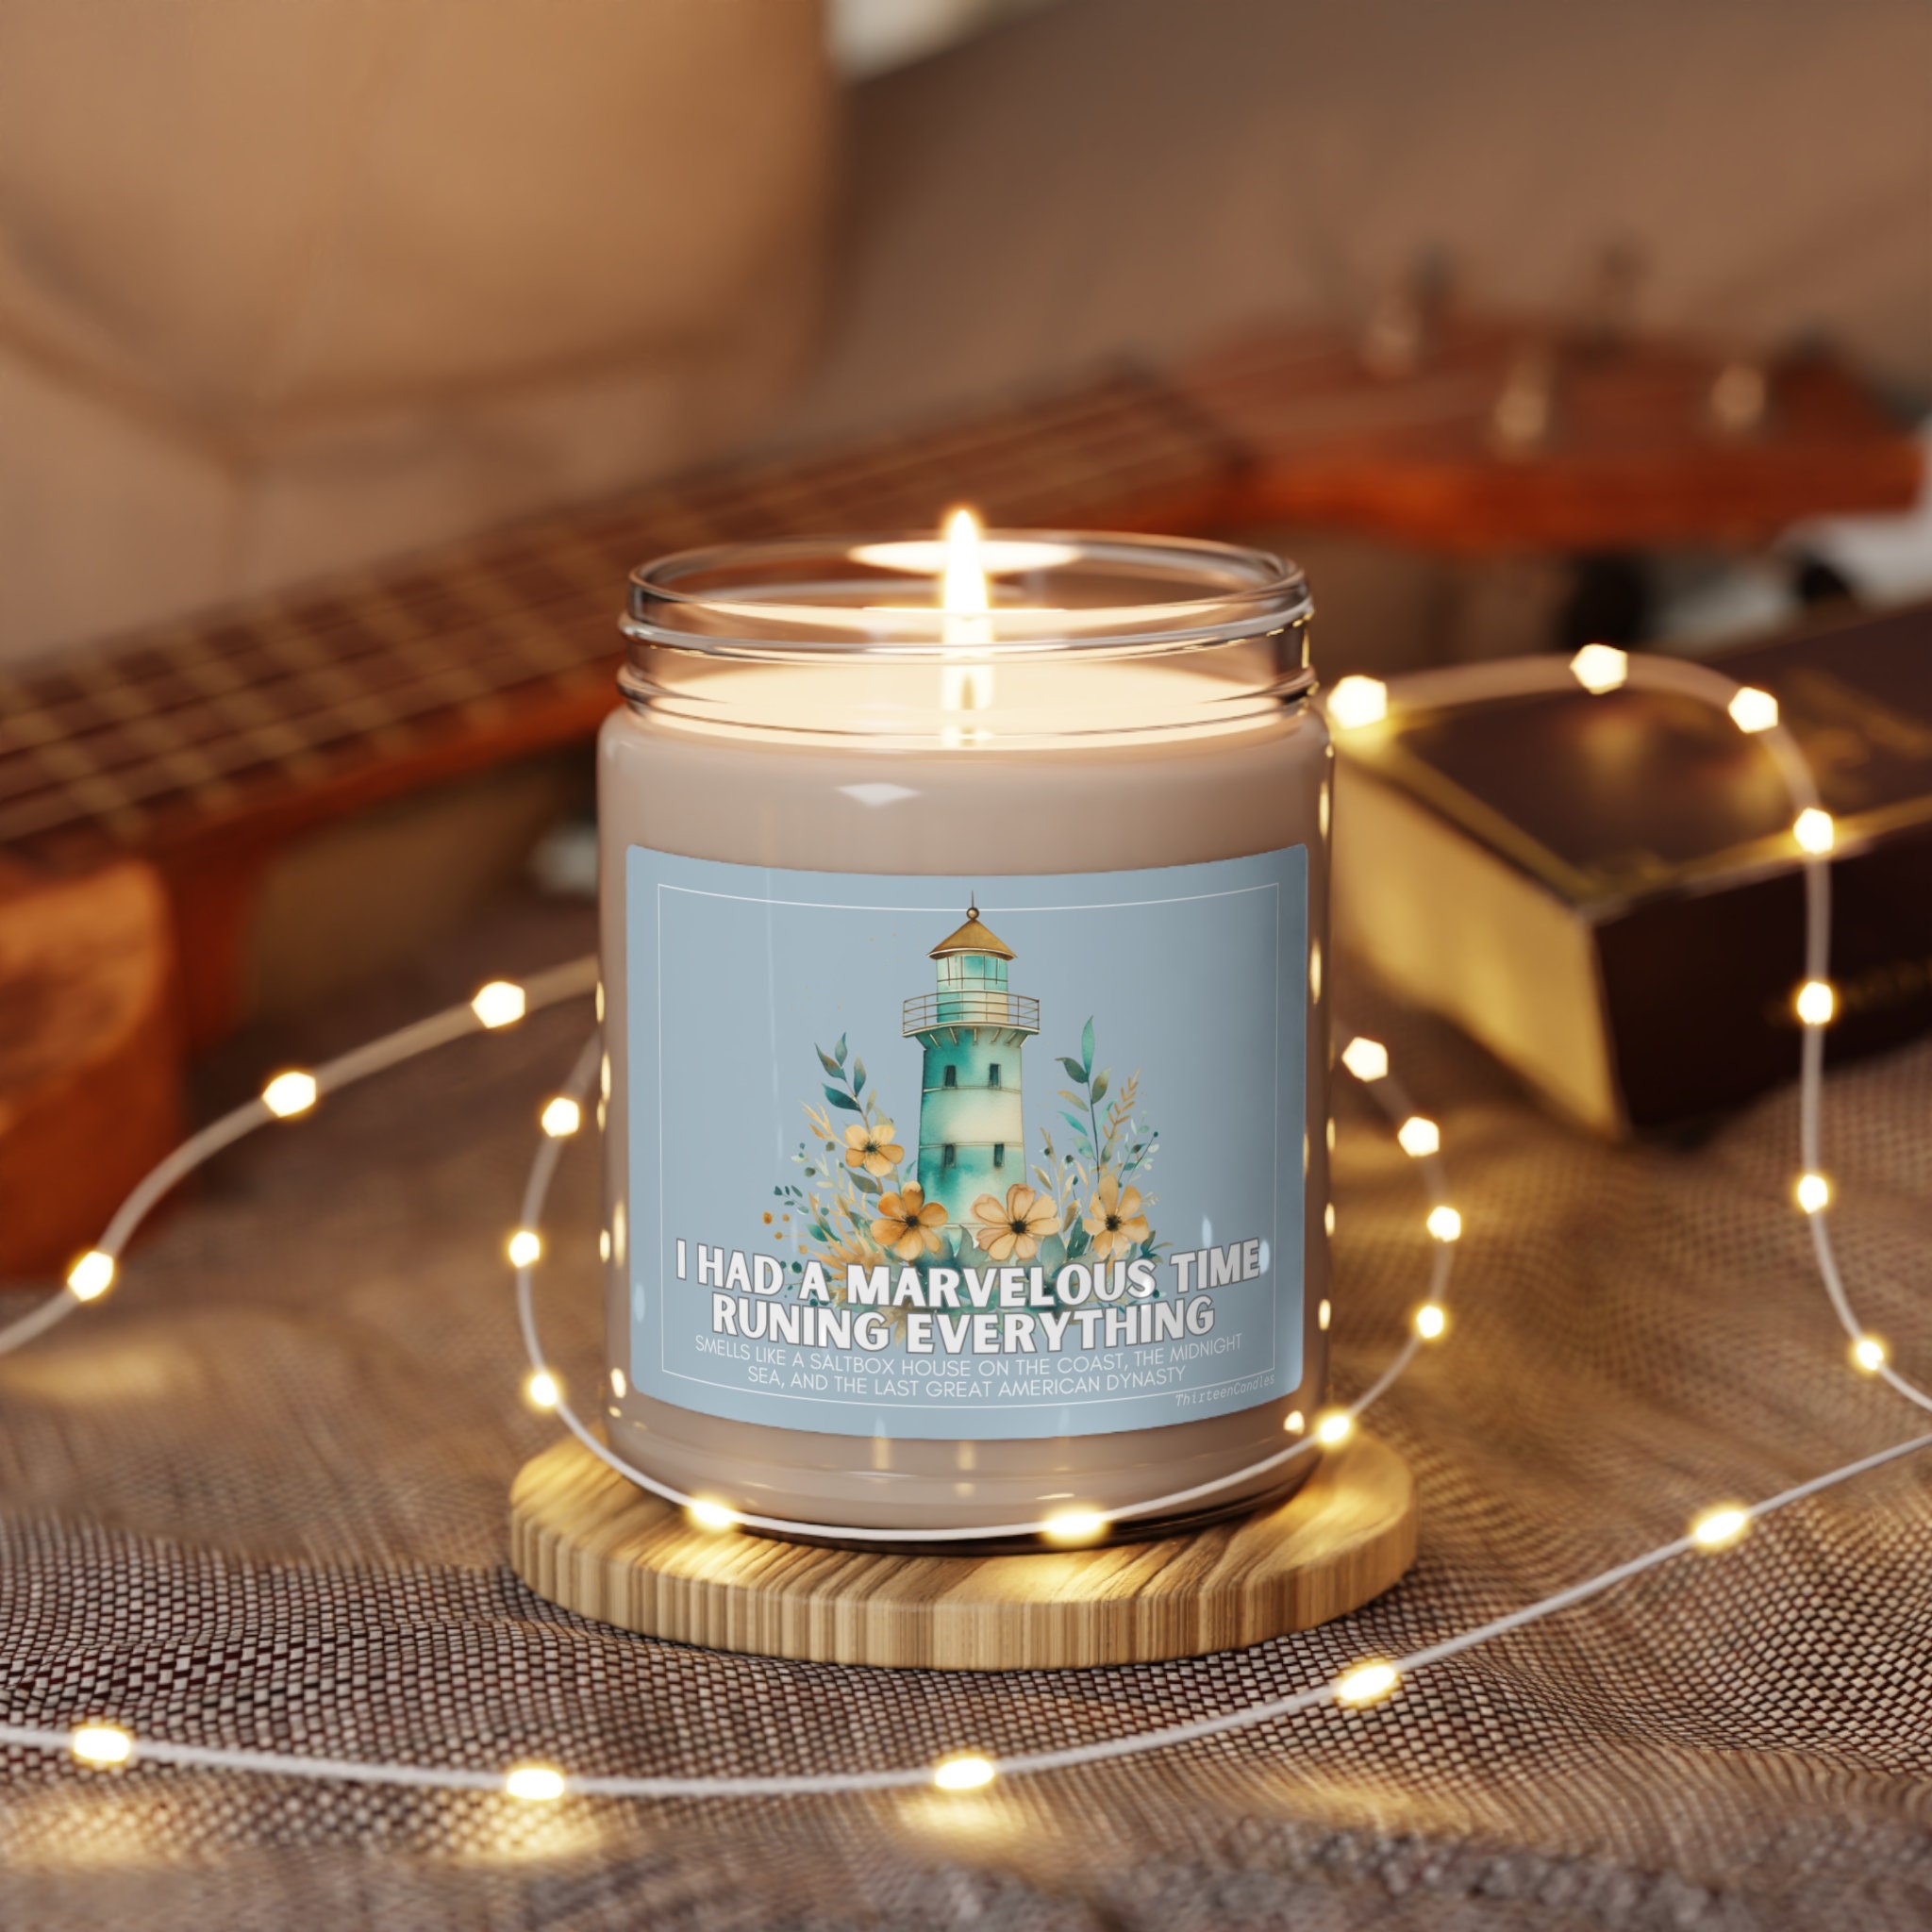 Last Great American Dynasty, Marvelous Time, Taylor Scented Candle